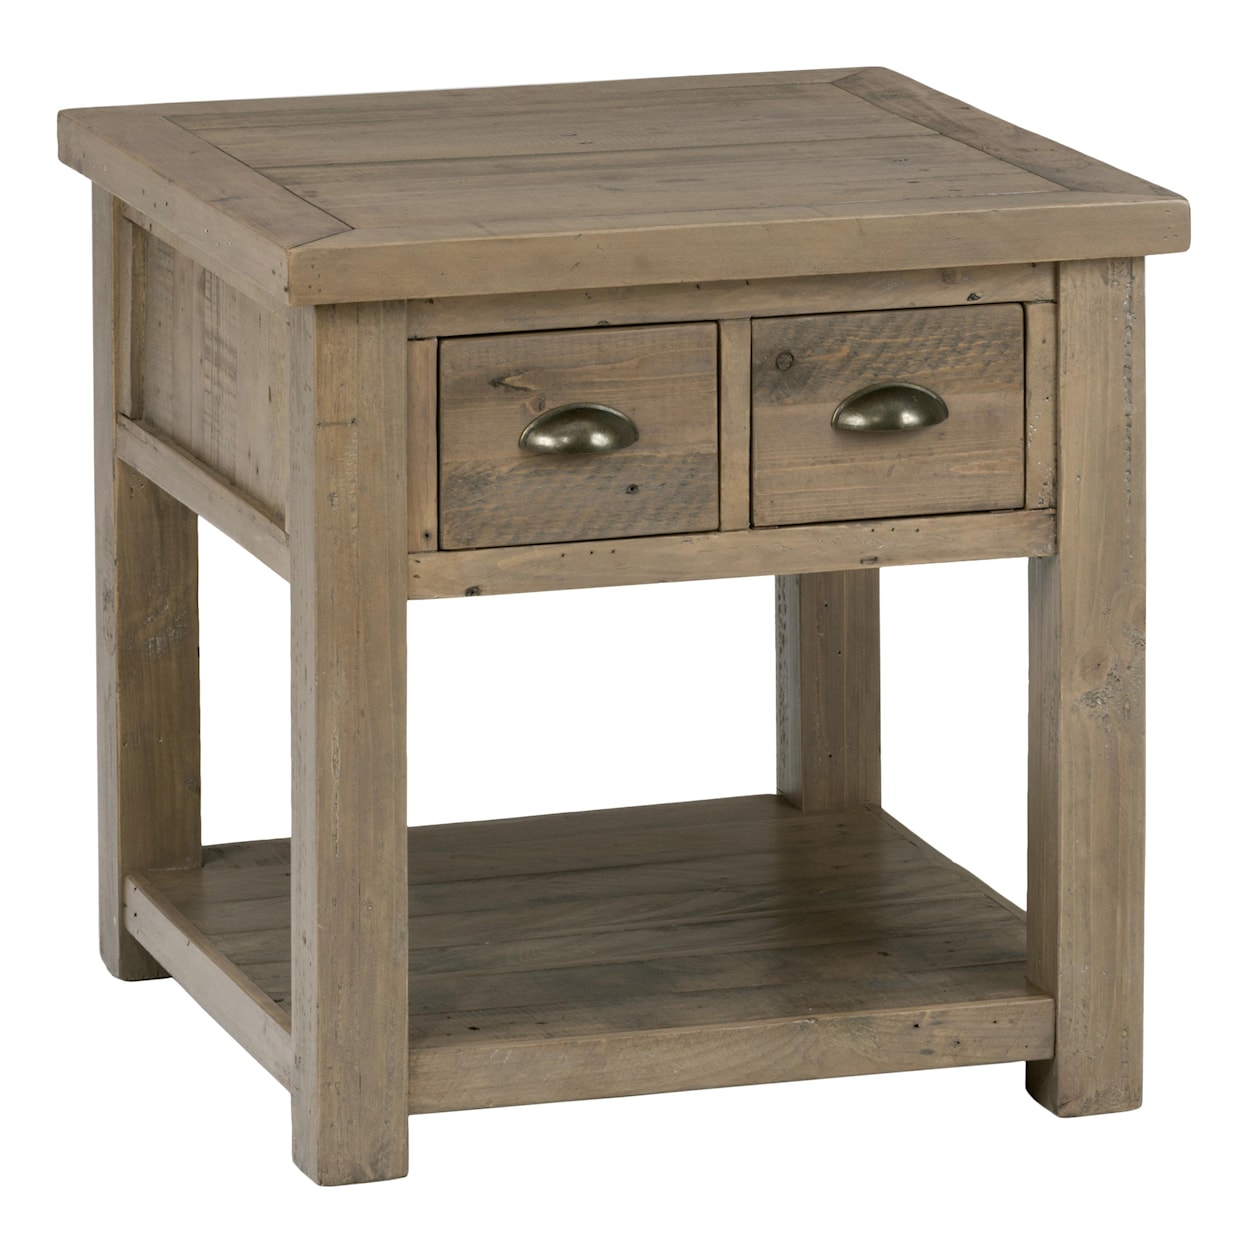 Jofran Slater Mill Pine End Table